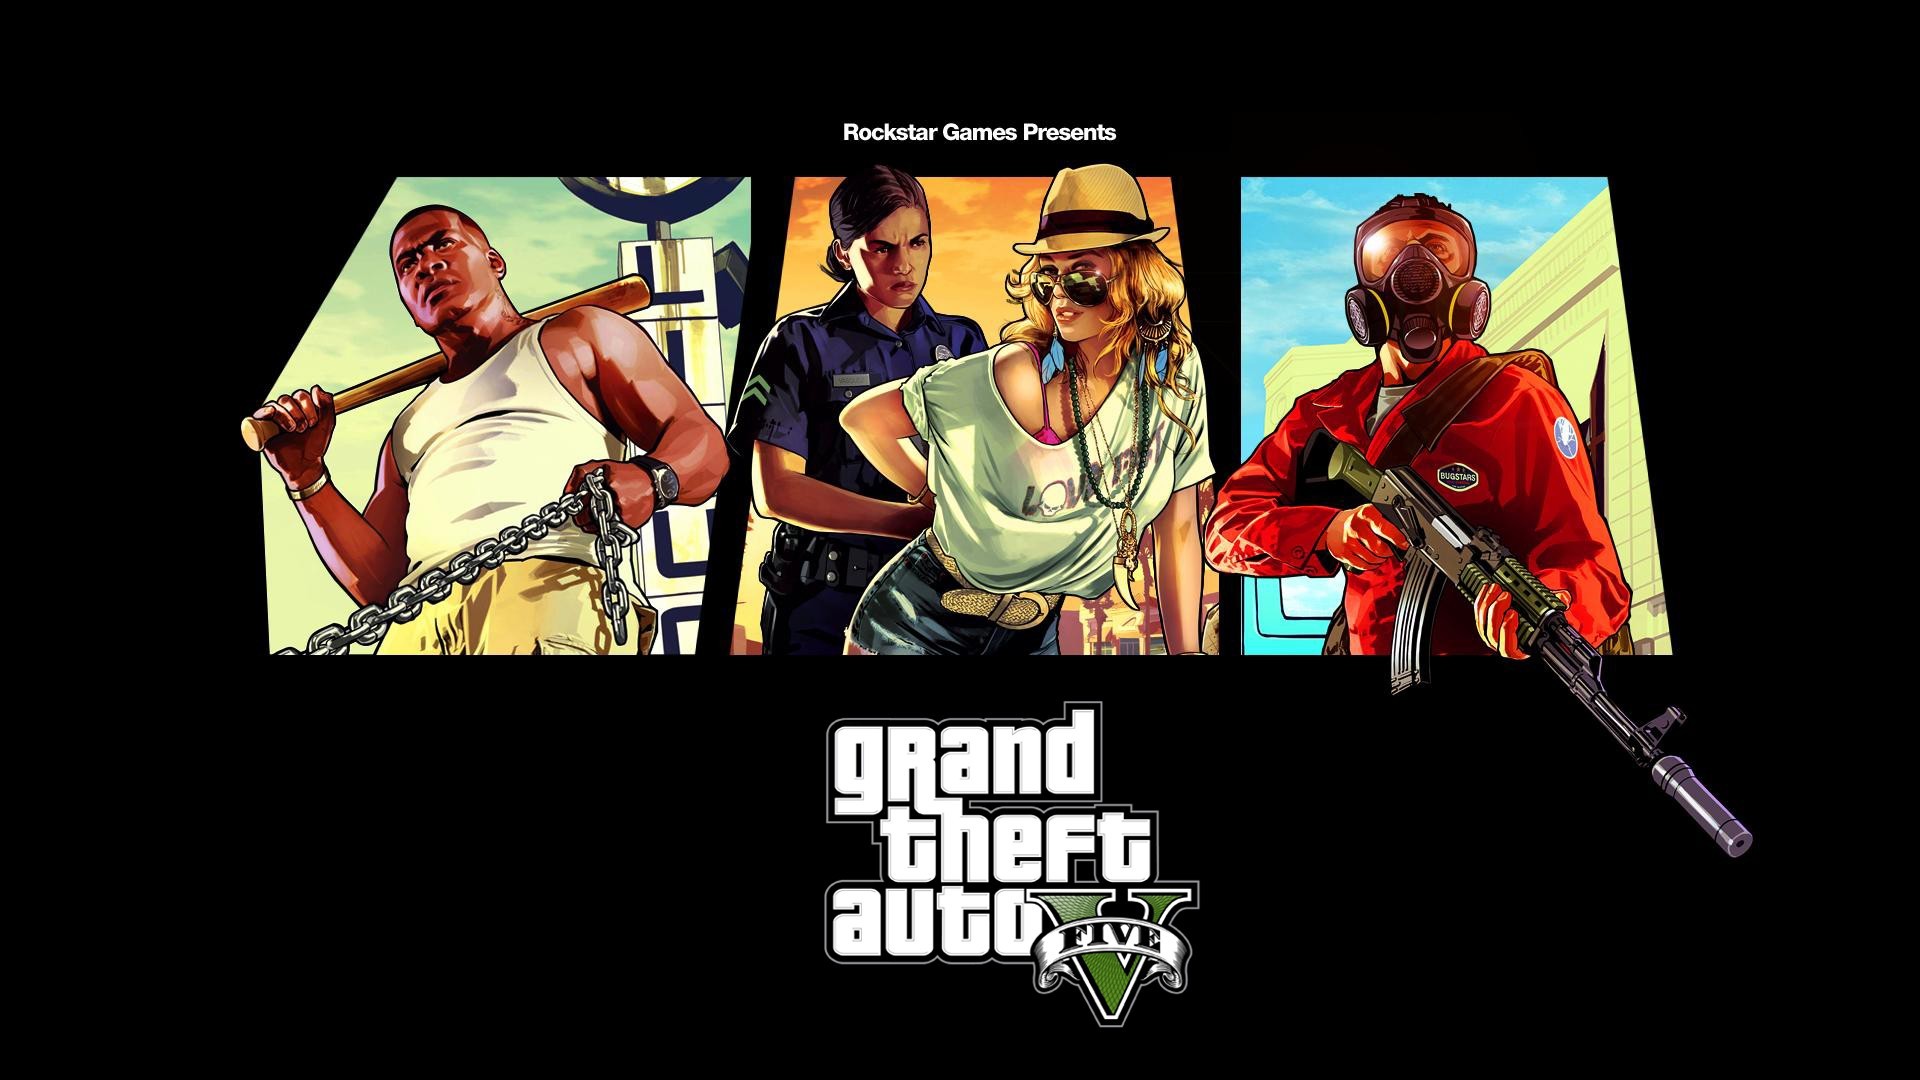 Grand Theft Auto V Video Games Collage Rockstar Games PC Gaming 1920x1080